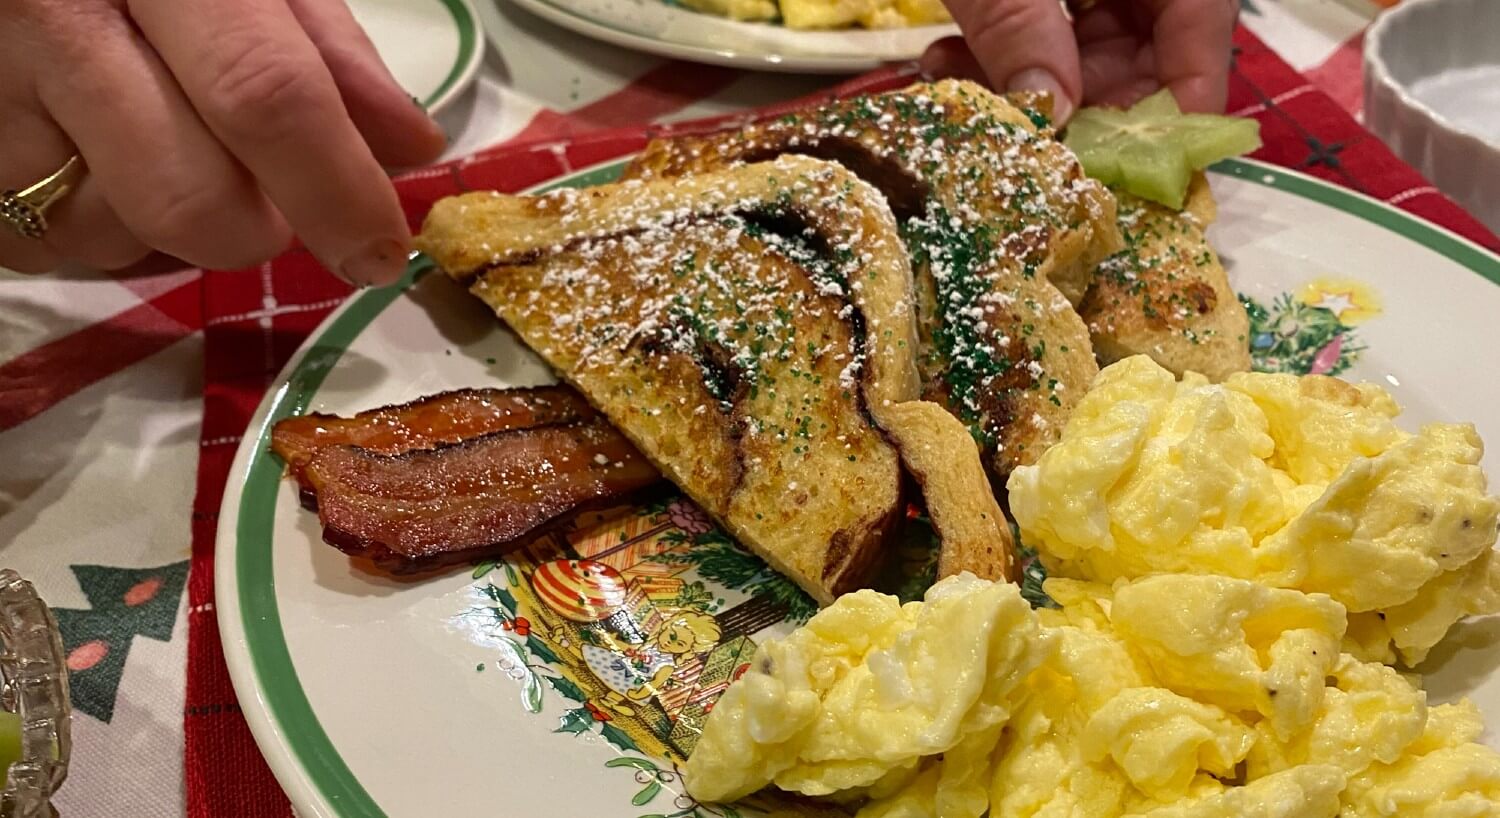 A decorative breakfast plate with French toast, bacon and scrambled eggs